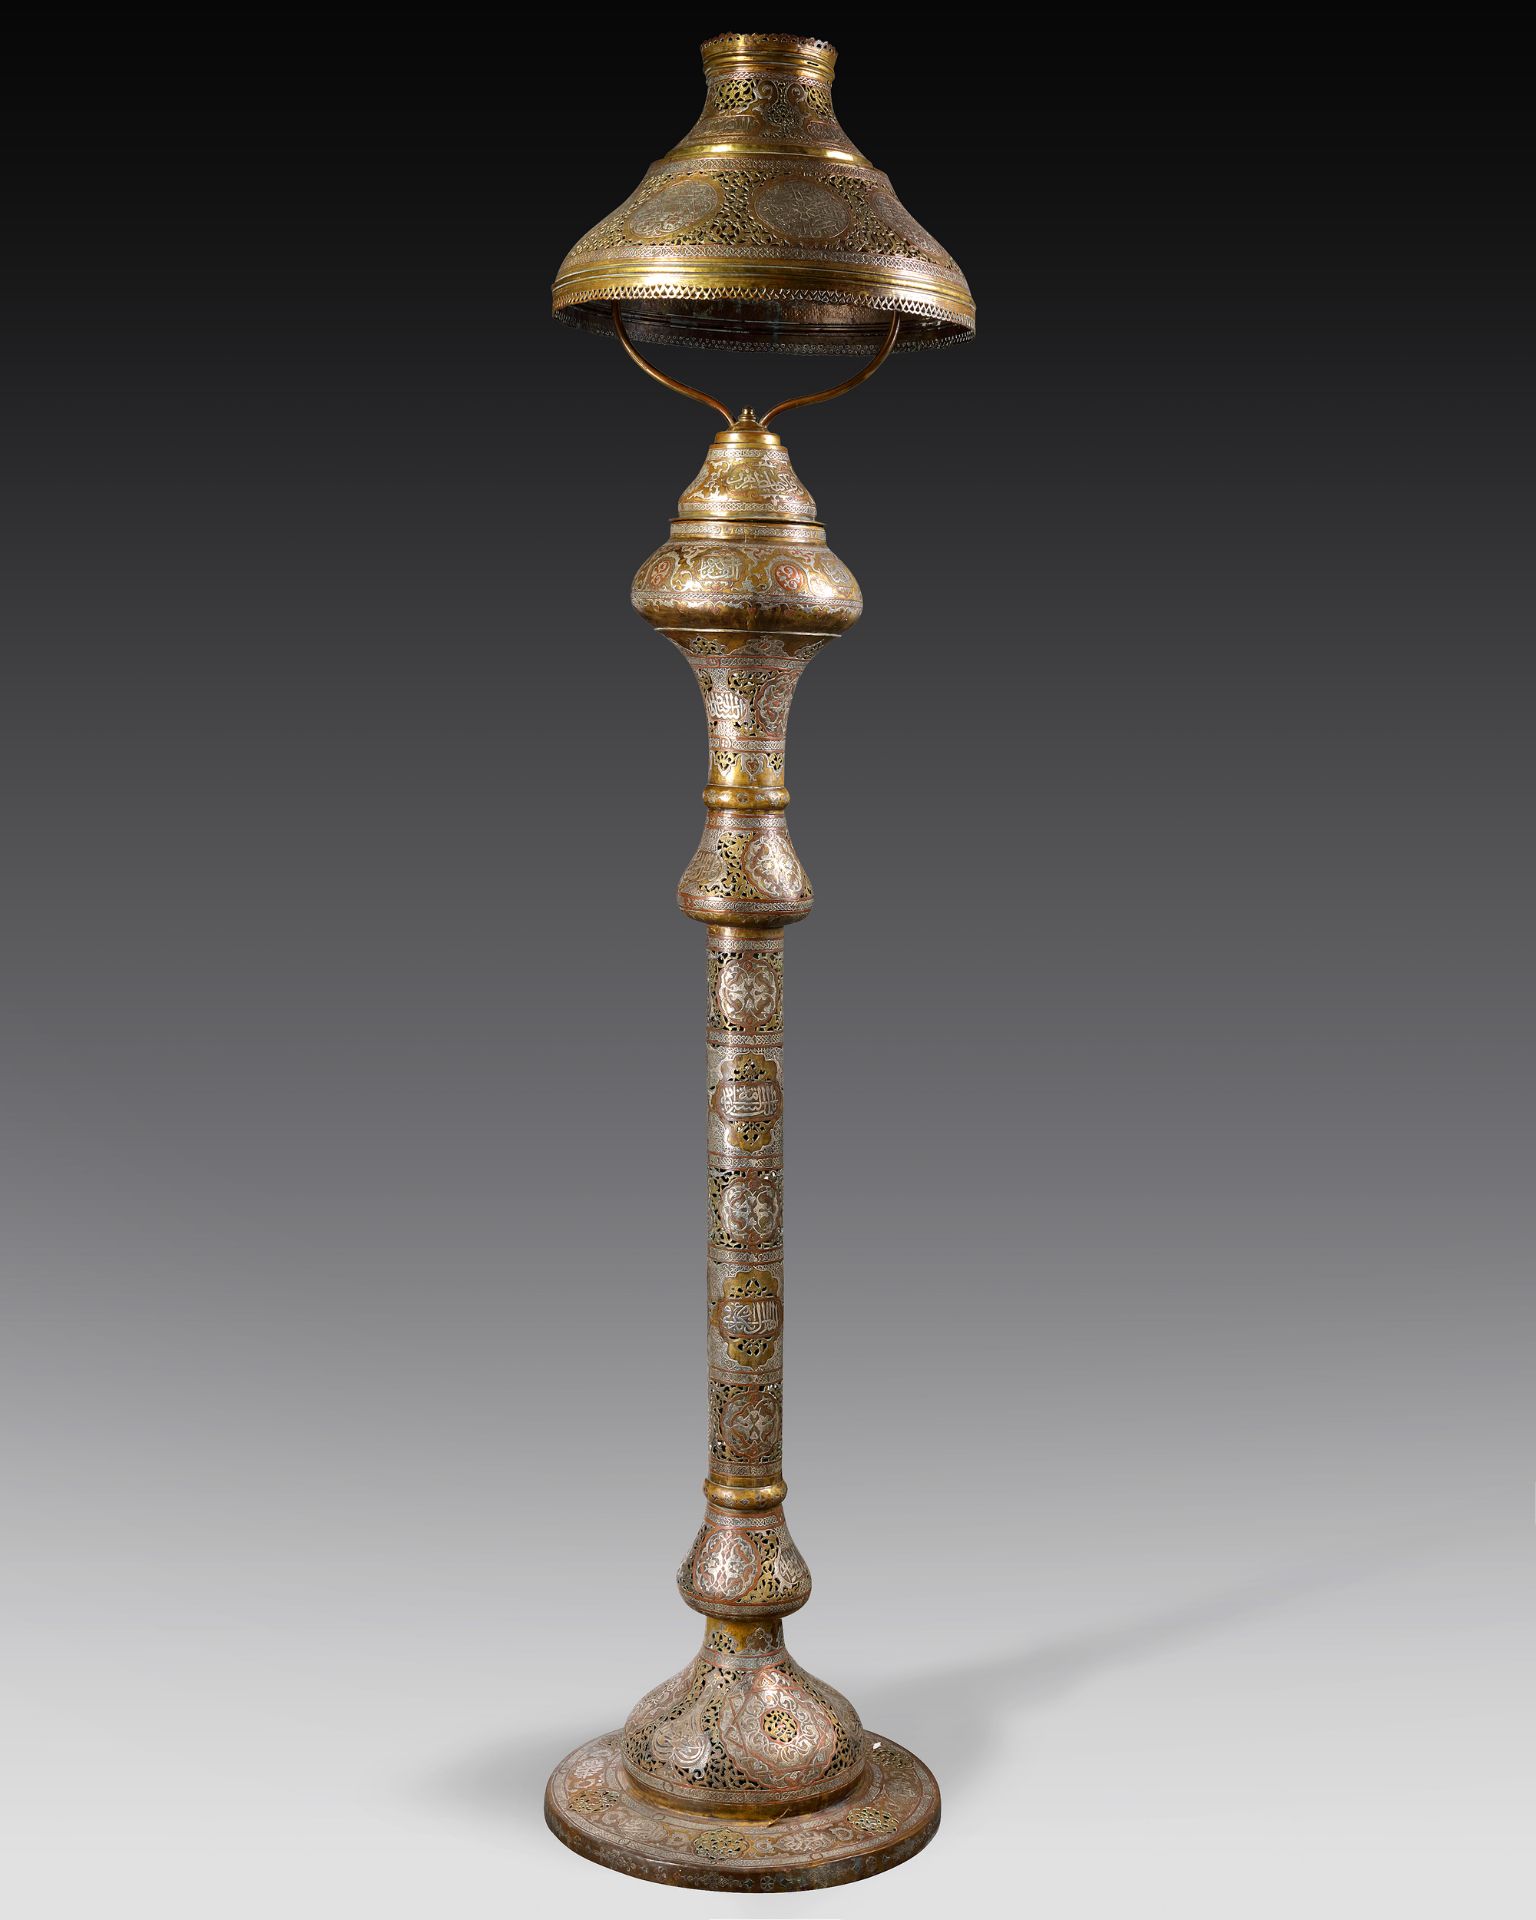 A LARGE ISLAMIC SILVER AND COPPER INLAID LAMP, 19TH CENTURY - Image 2 of 4